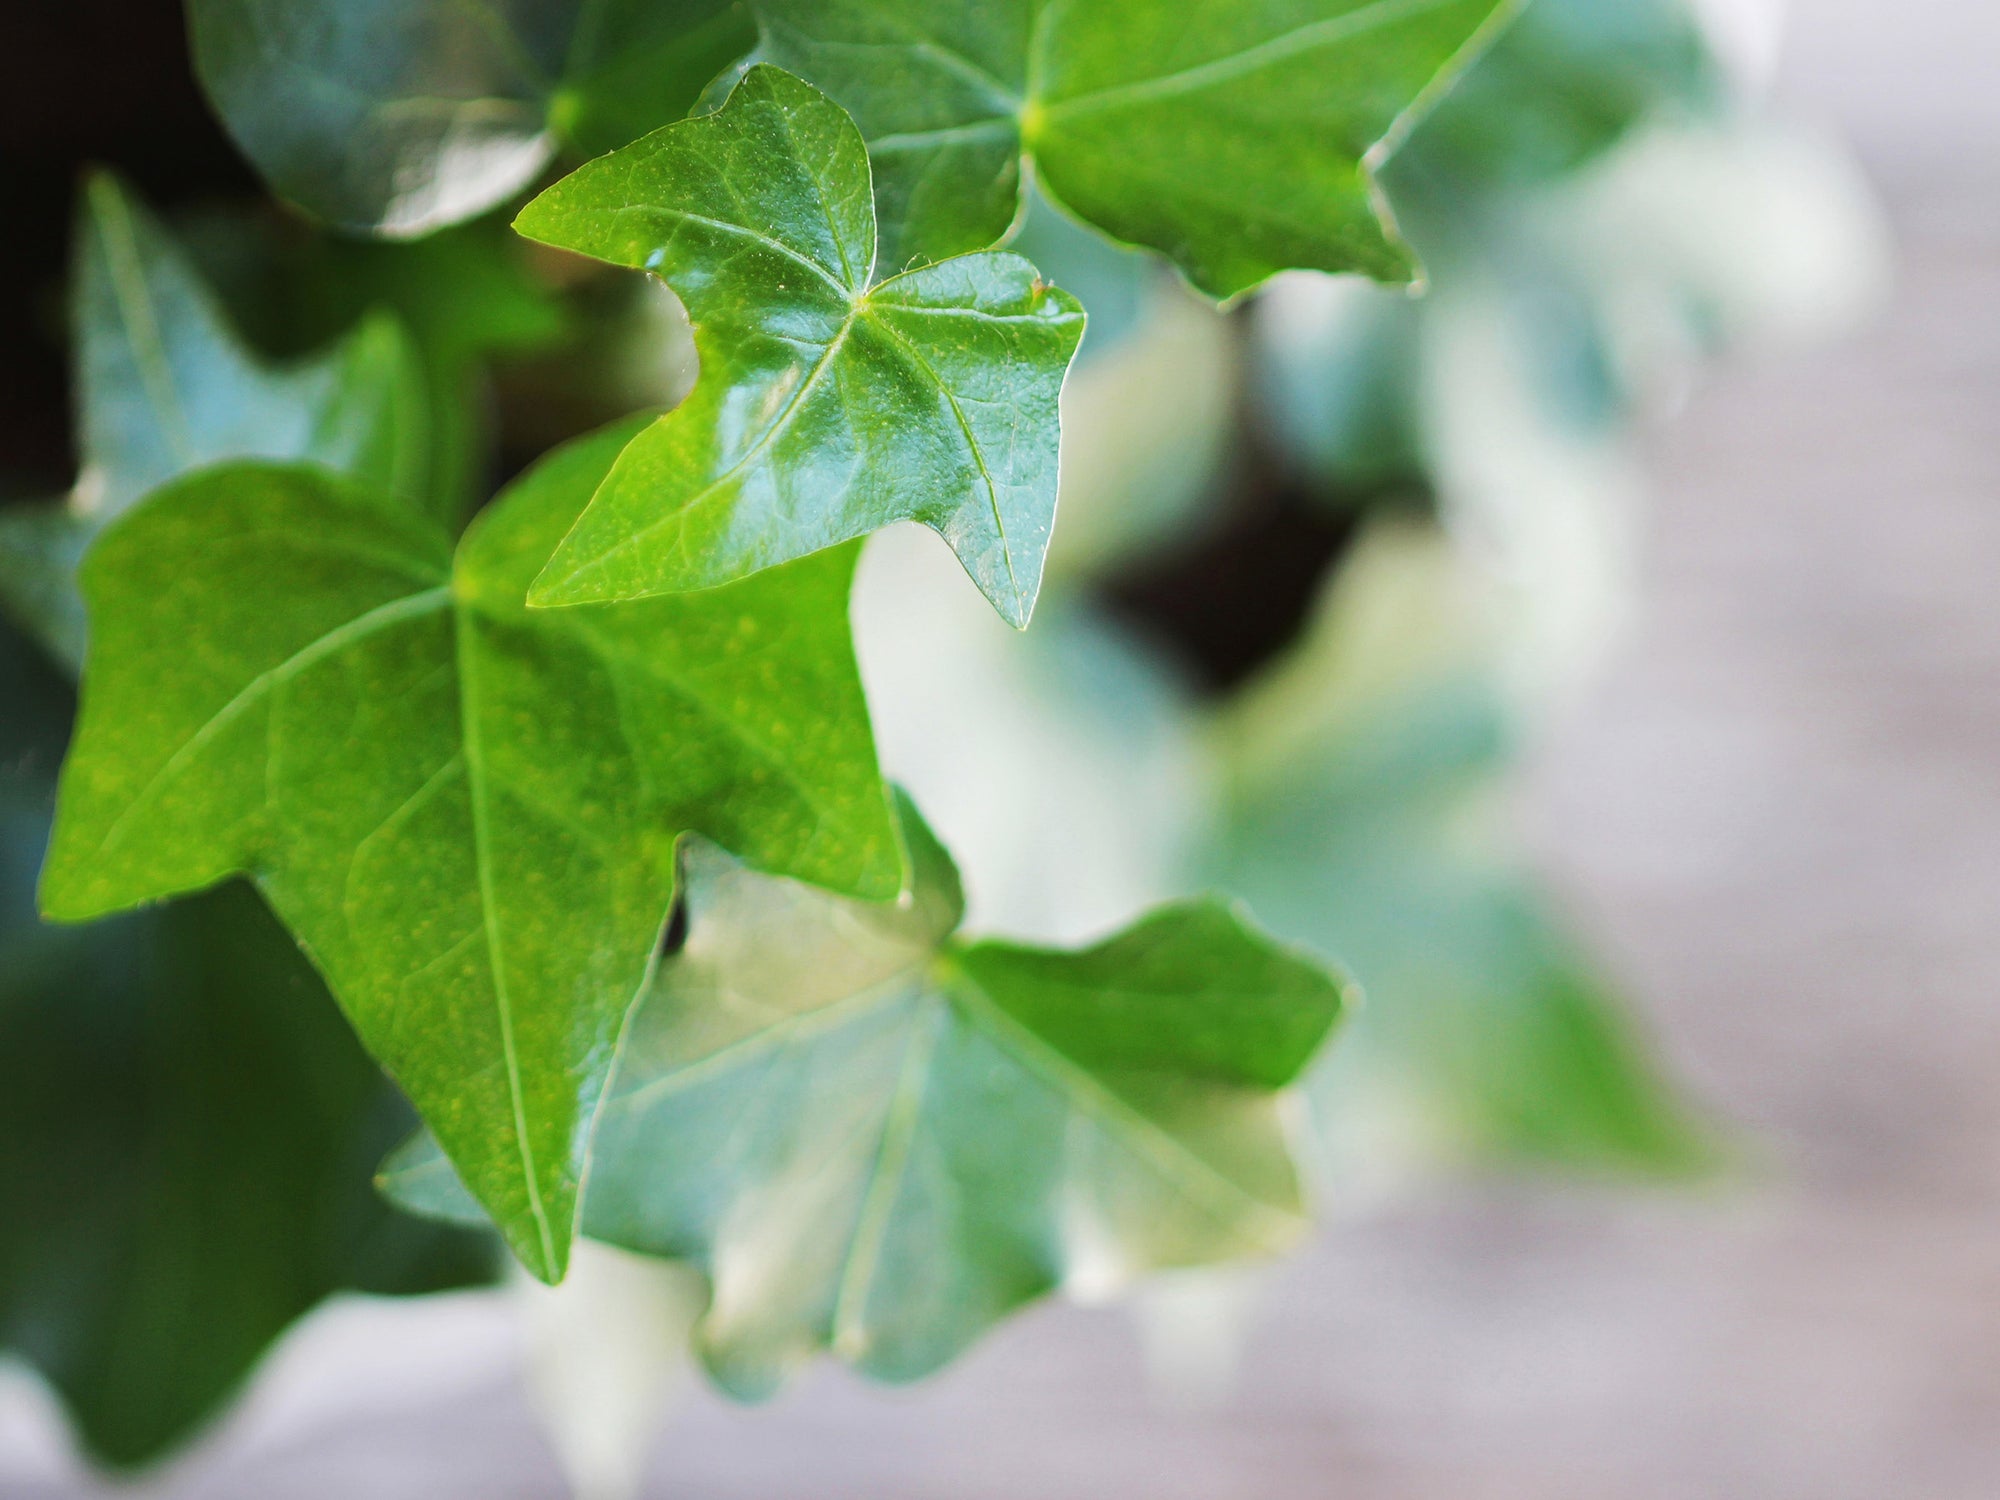 Leaves of English ivy plant